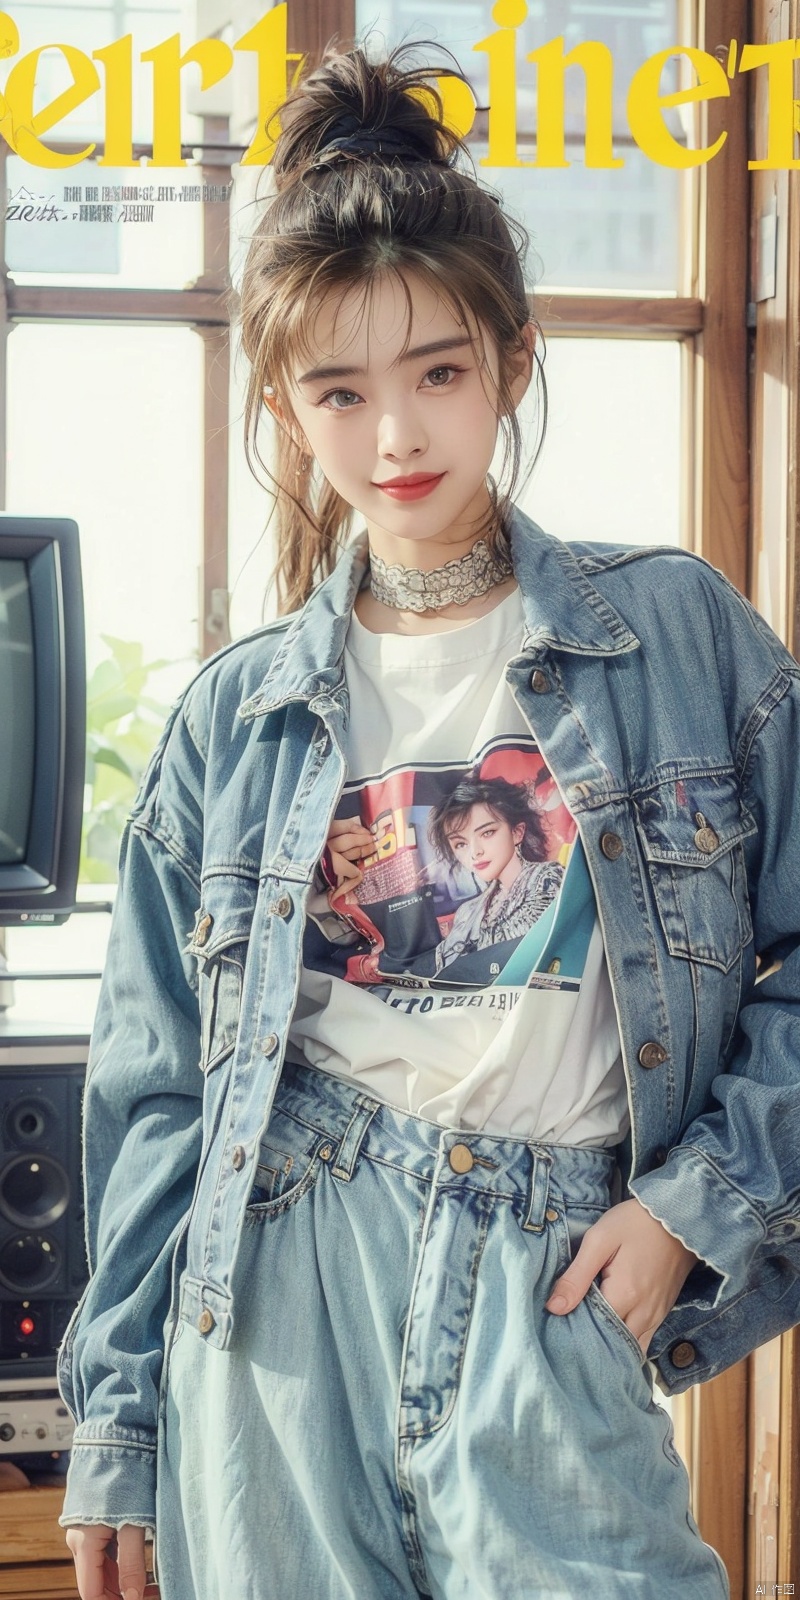  80sDBA style, fashion, (magazine: 1.3), (cover style: 1.3),Best quality, masterpiece, high-resolution, 4K, 1 girl, smile, exquisite makeup,shirt,jean,jacket , lace, tv,boombox
, wangzuxian, zhangmin